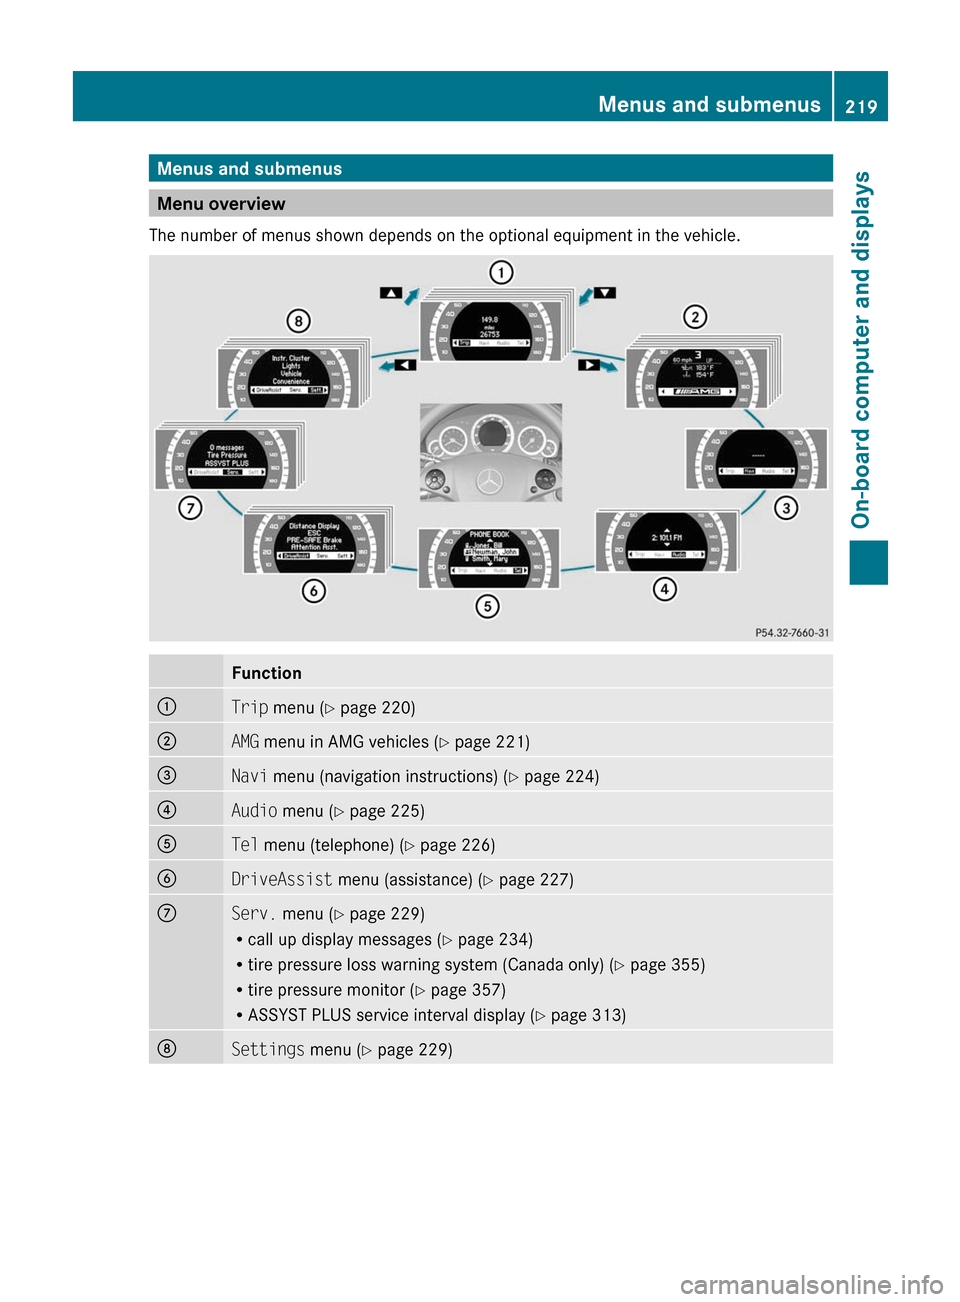 MERCEDES-BENZ E350 4MATIC 2011 W212 Owners Manual Menus and submenus
Menu overview
The number of menus shown depends on the optional equipment in the vehicle. 
Function:Trip  menu ( Y page 220);AMG  menu in AMG vehicles ( Y page 221)=Navi  menu (navi